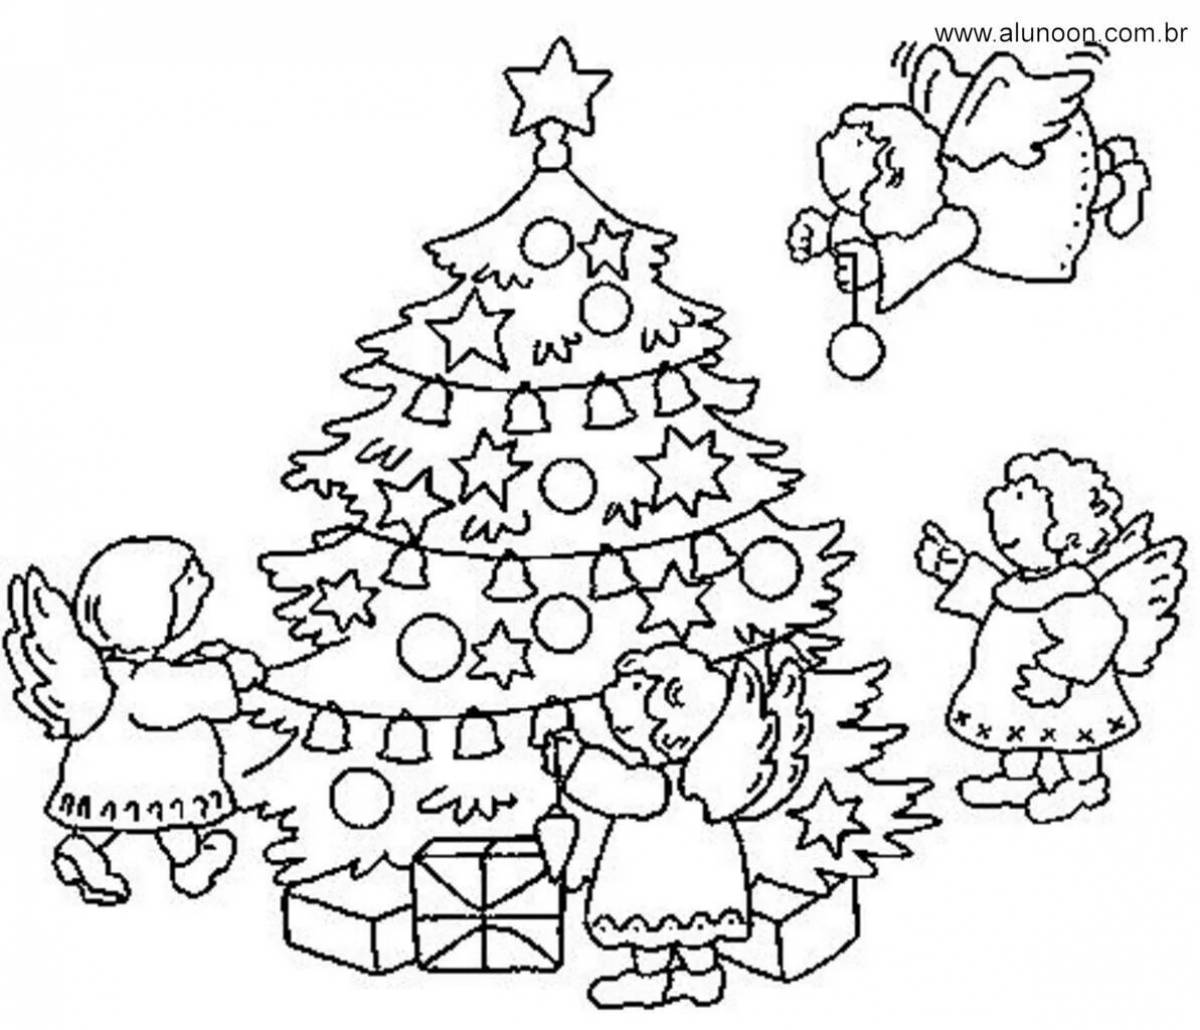 Generous Christmas tree coloring for kids